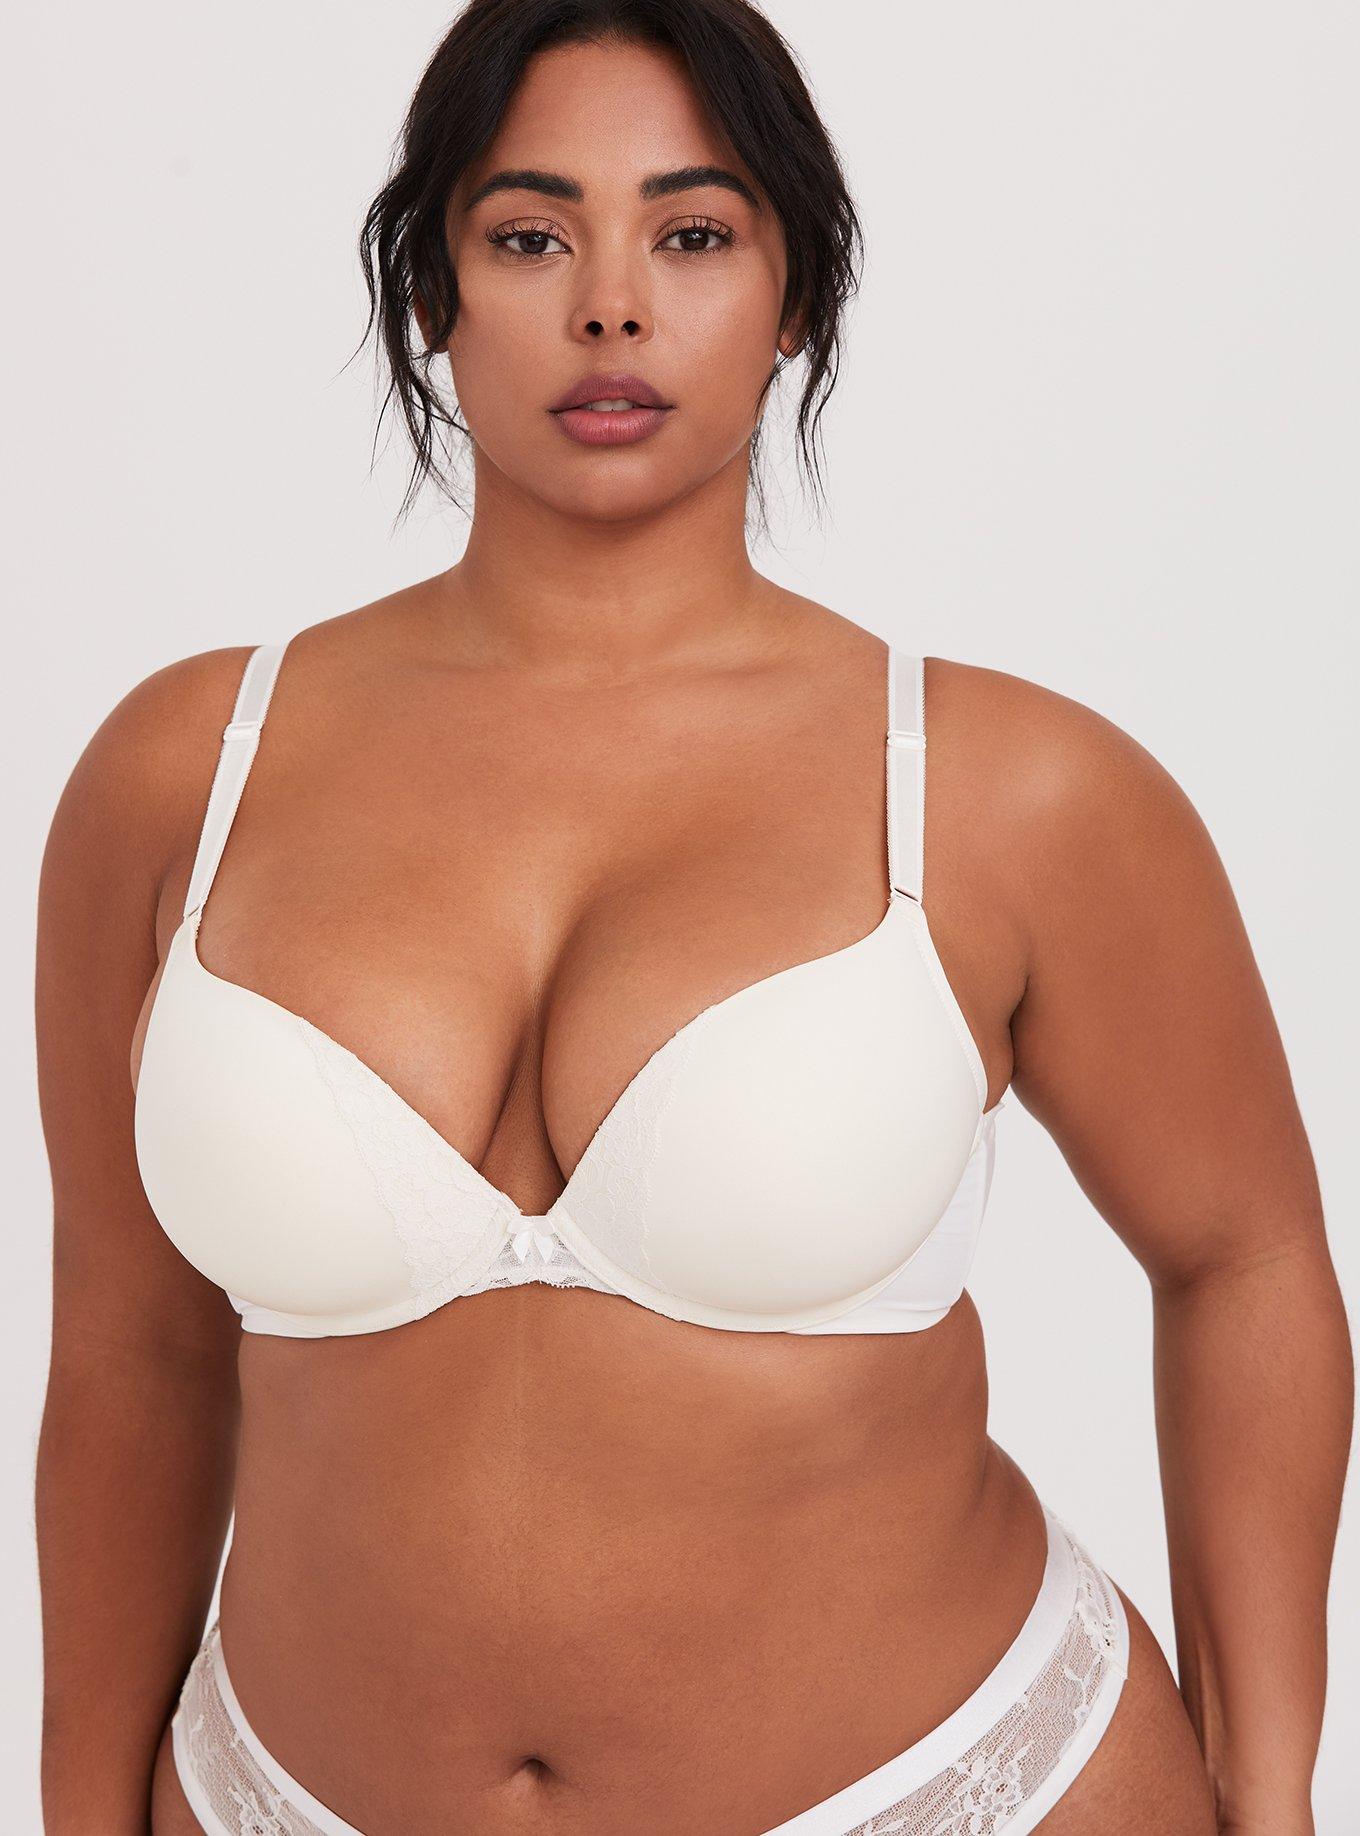 Torrid can't even have right sizes for their model photos, this bra doesn't  even looks like it fits : r/PlusSizeFashion